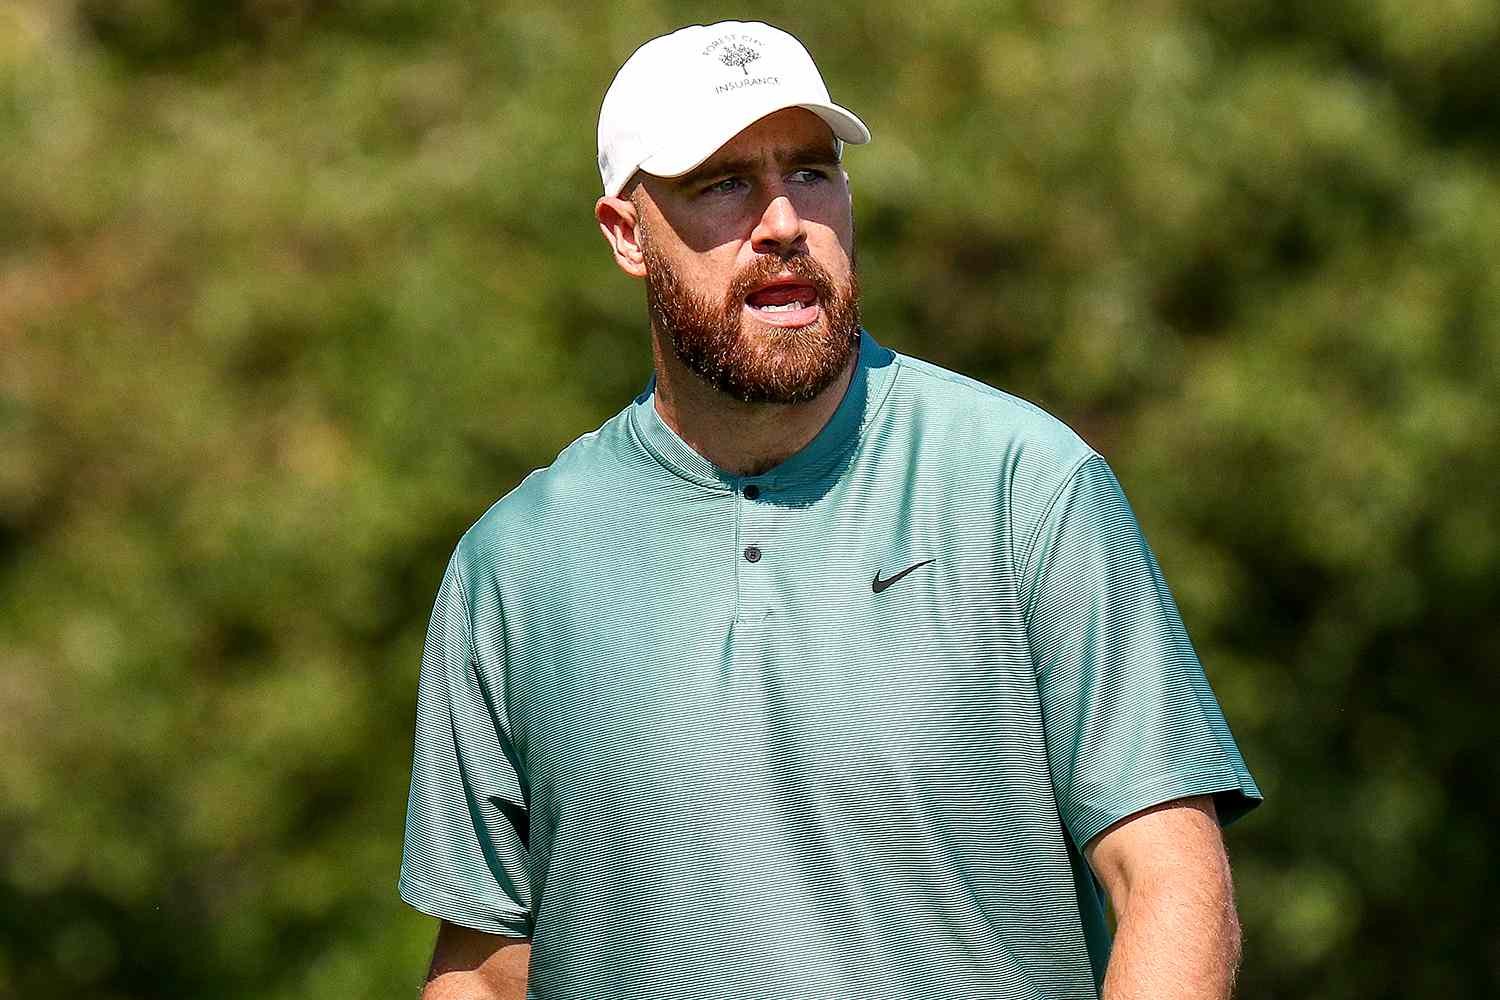 Travis Kelce Helps Injured Spectator After His Golf Ball Strikes Her at ACC Tournament